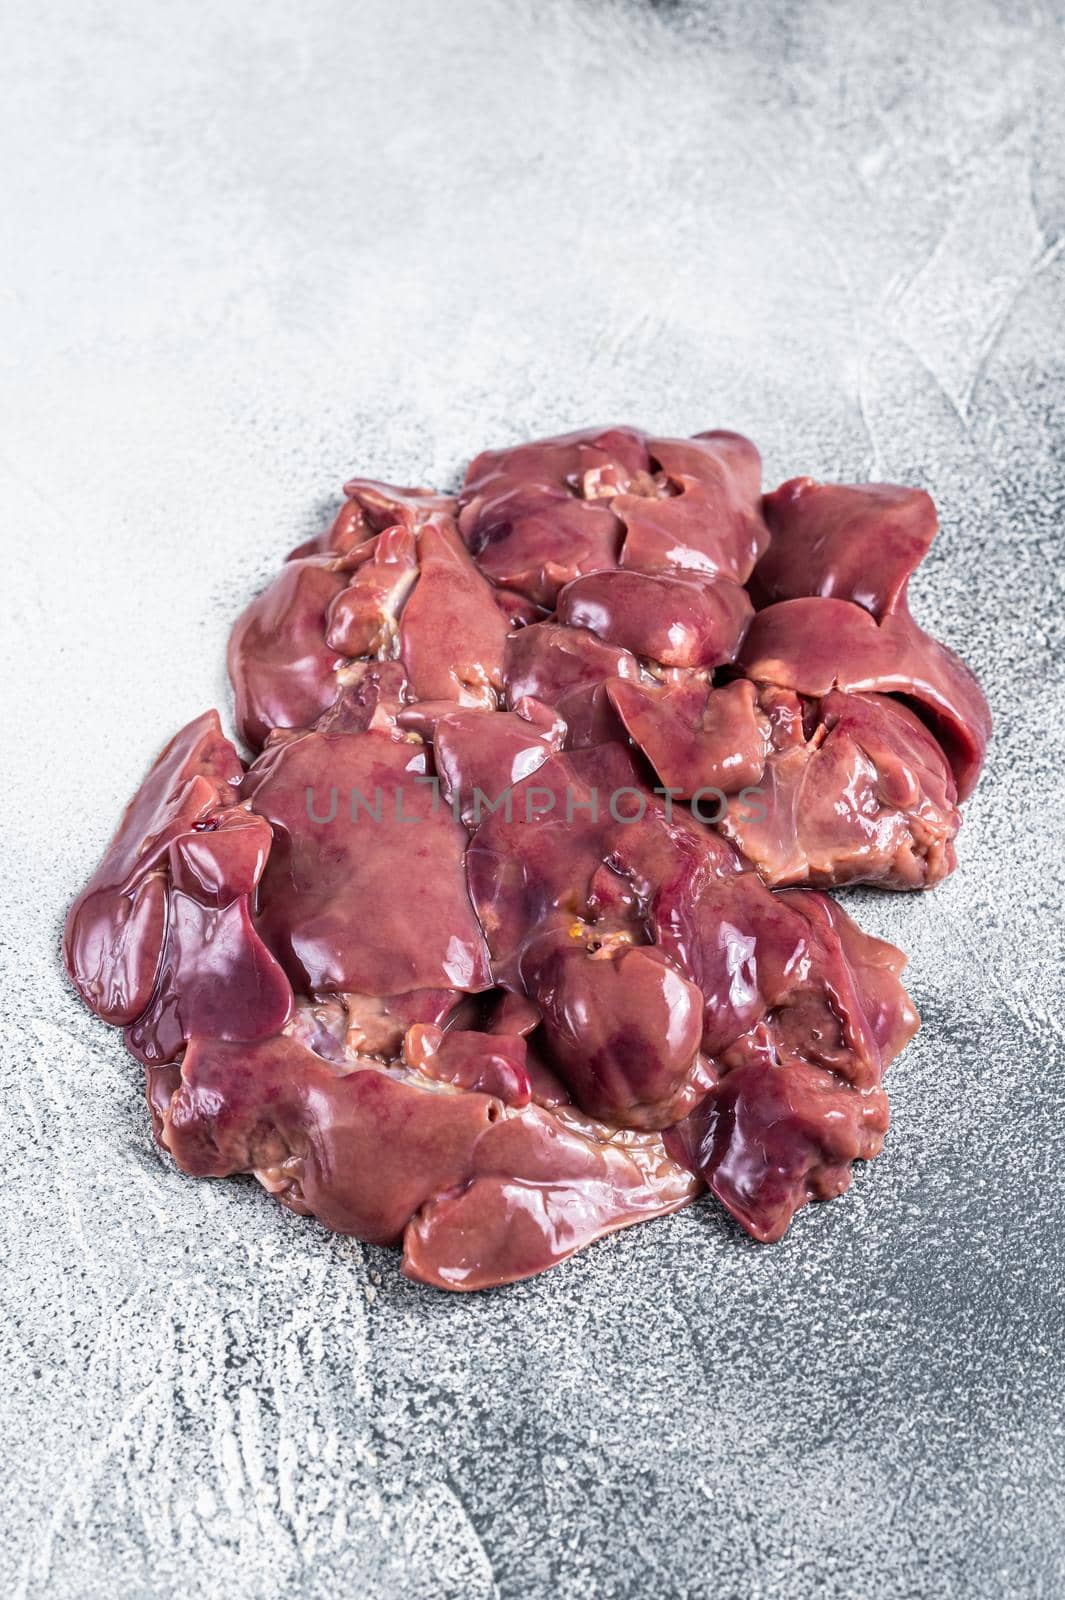 Raw chicken liver meat on butcher table. White background. Top view by Composter